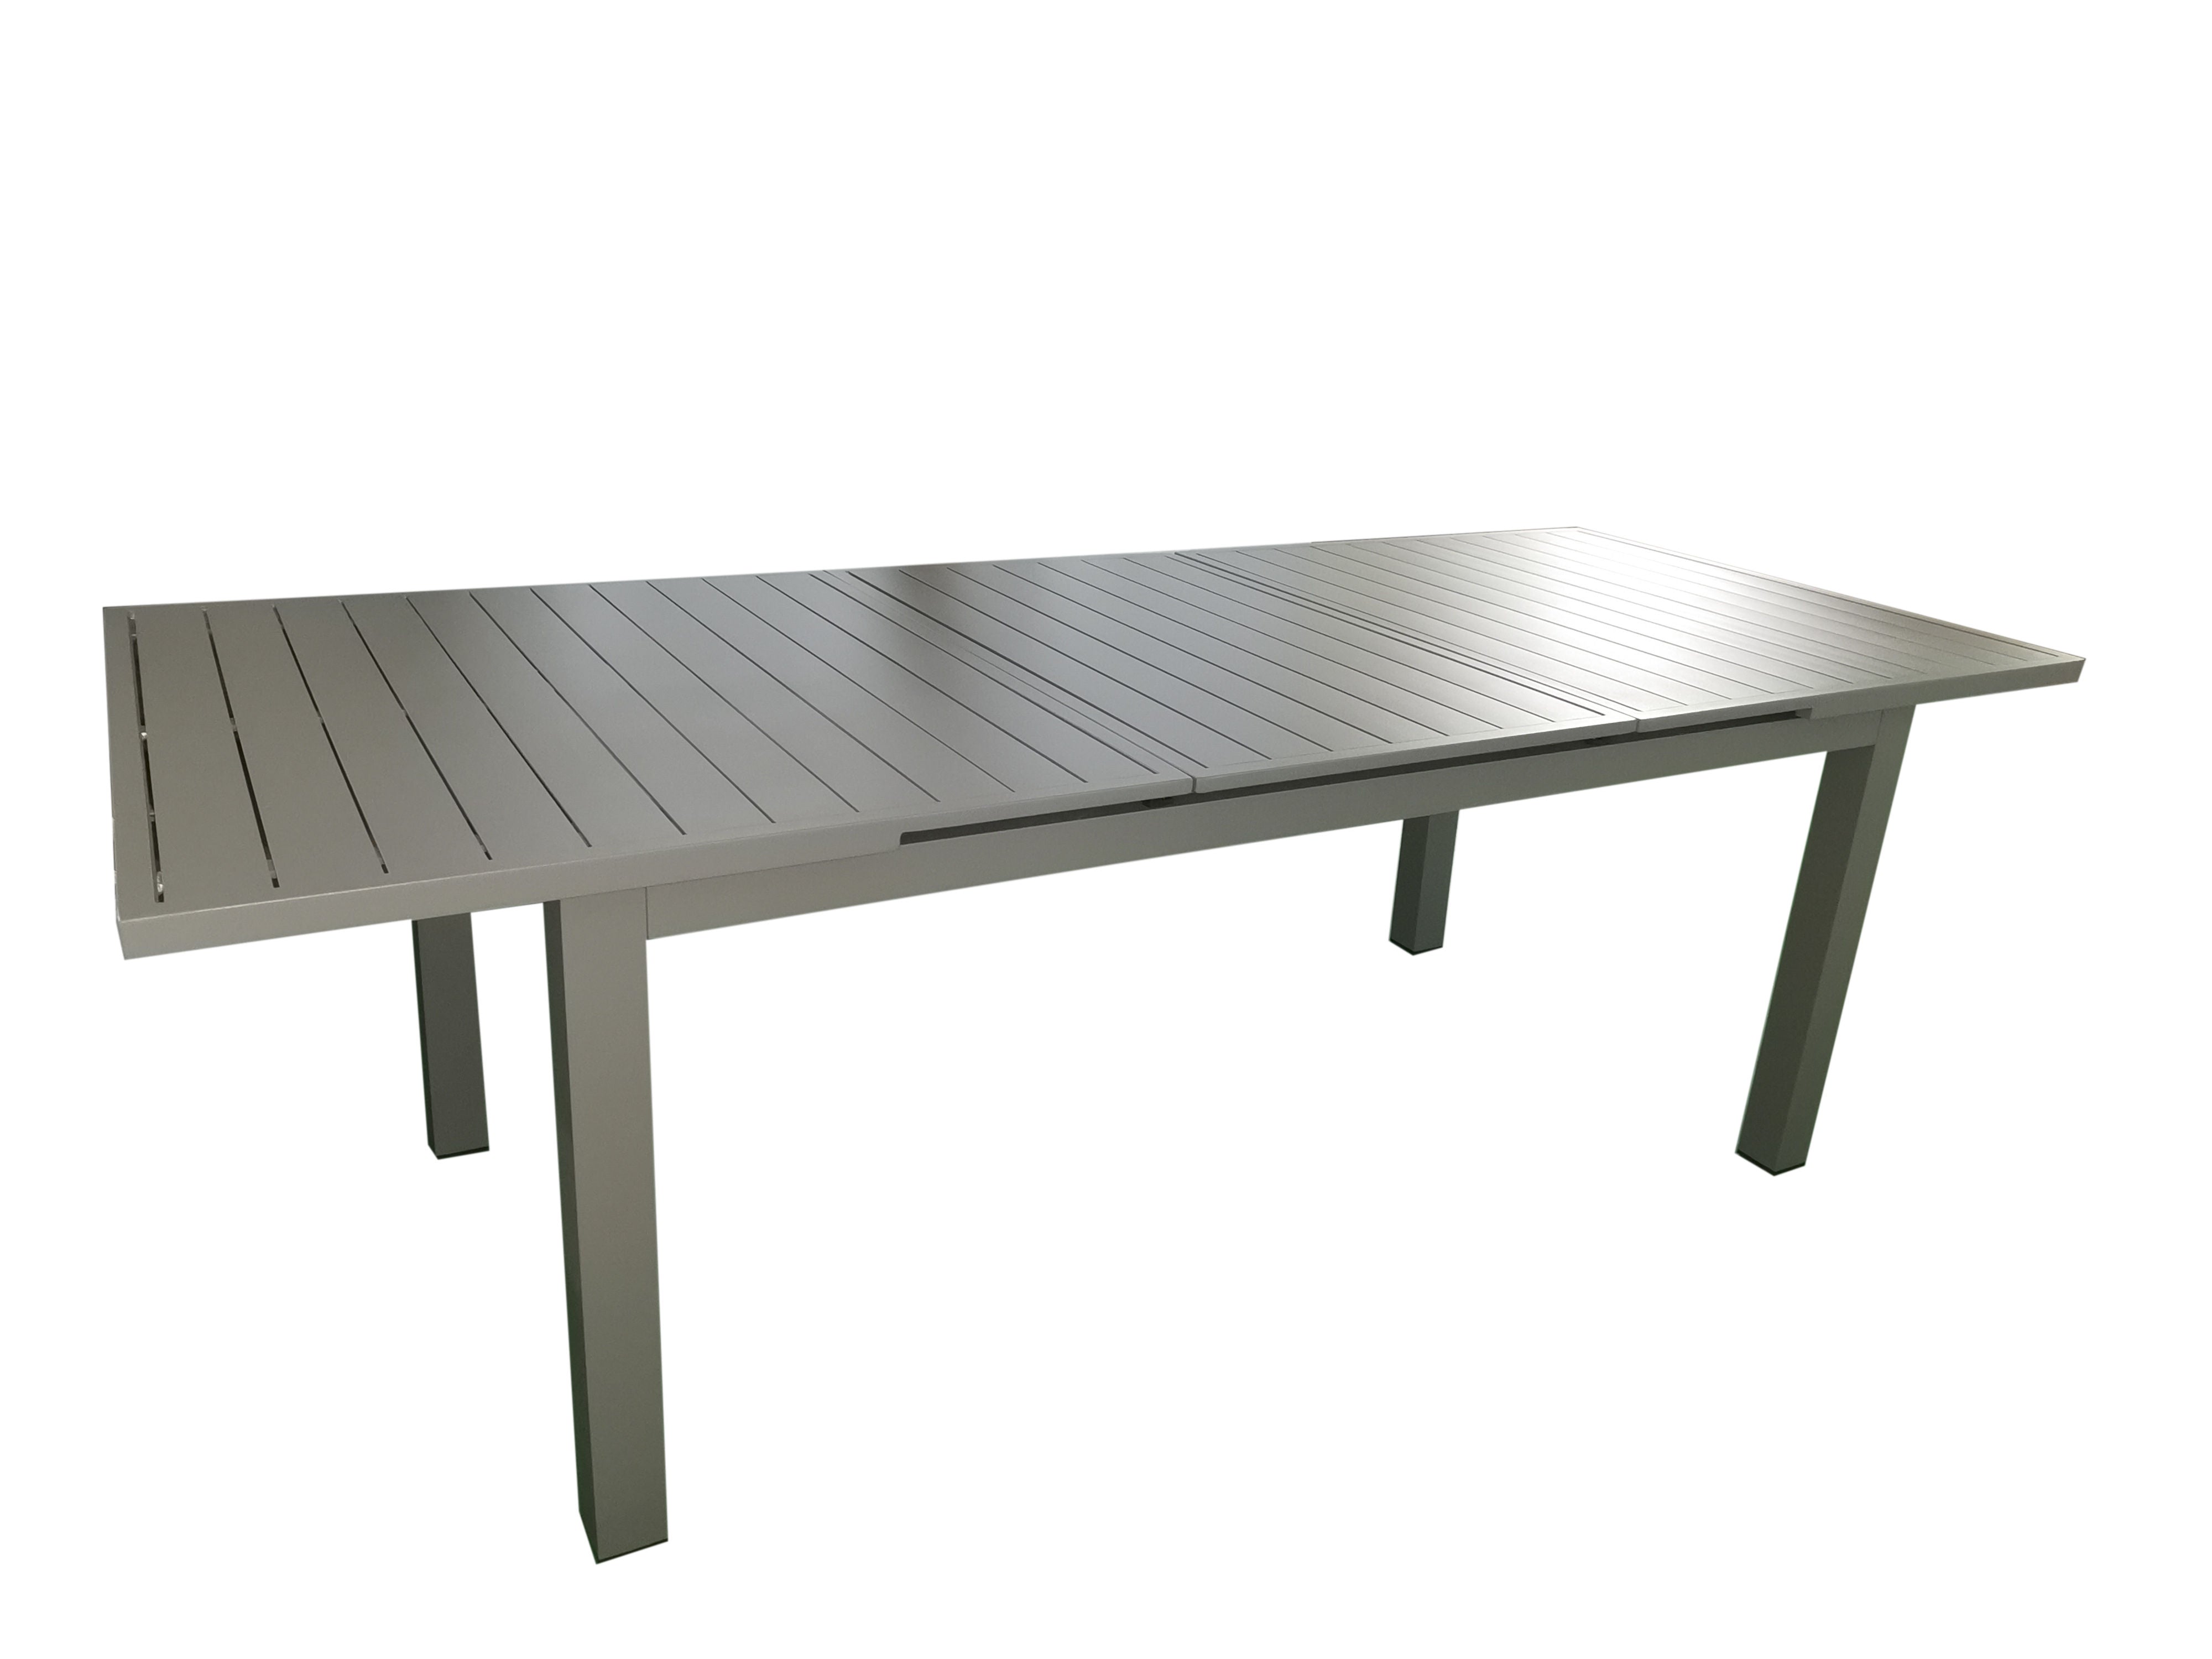 MOSS MOSS-T306TMA - Akumal Collection, Taupe matte extendable table with aluminum slats, tempered glass table top and up/down sliding mechanism 71"(95" with extension) x 39" x H 29.1"